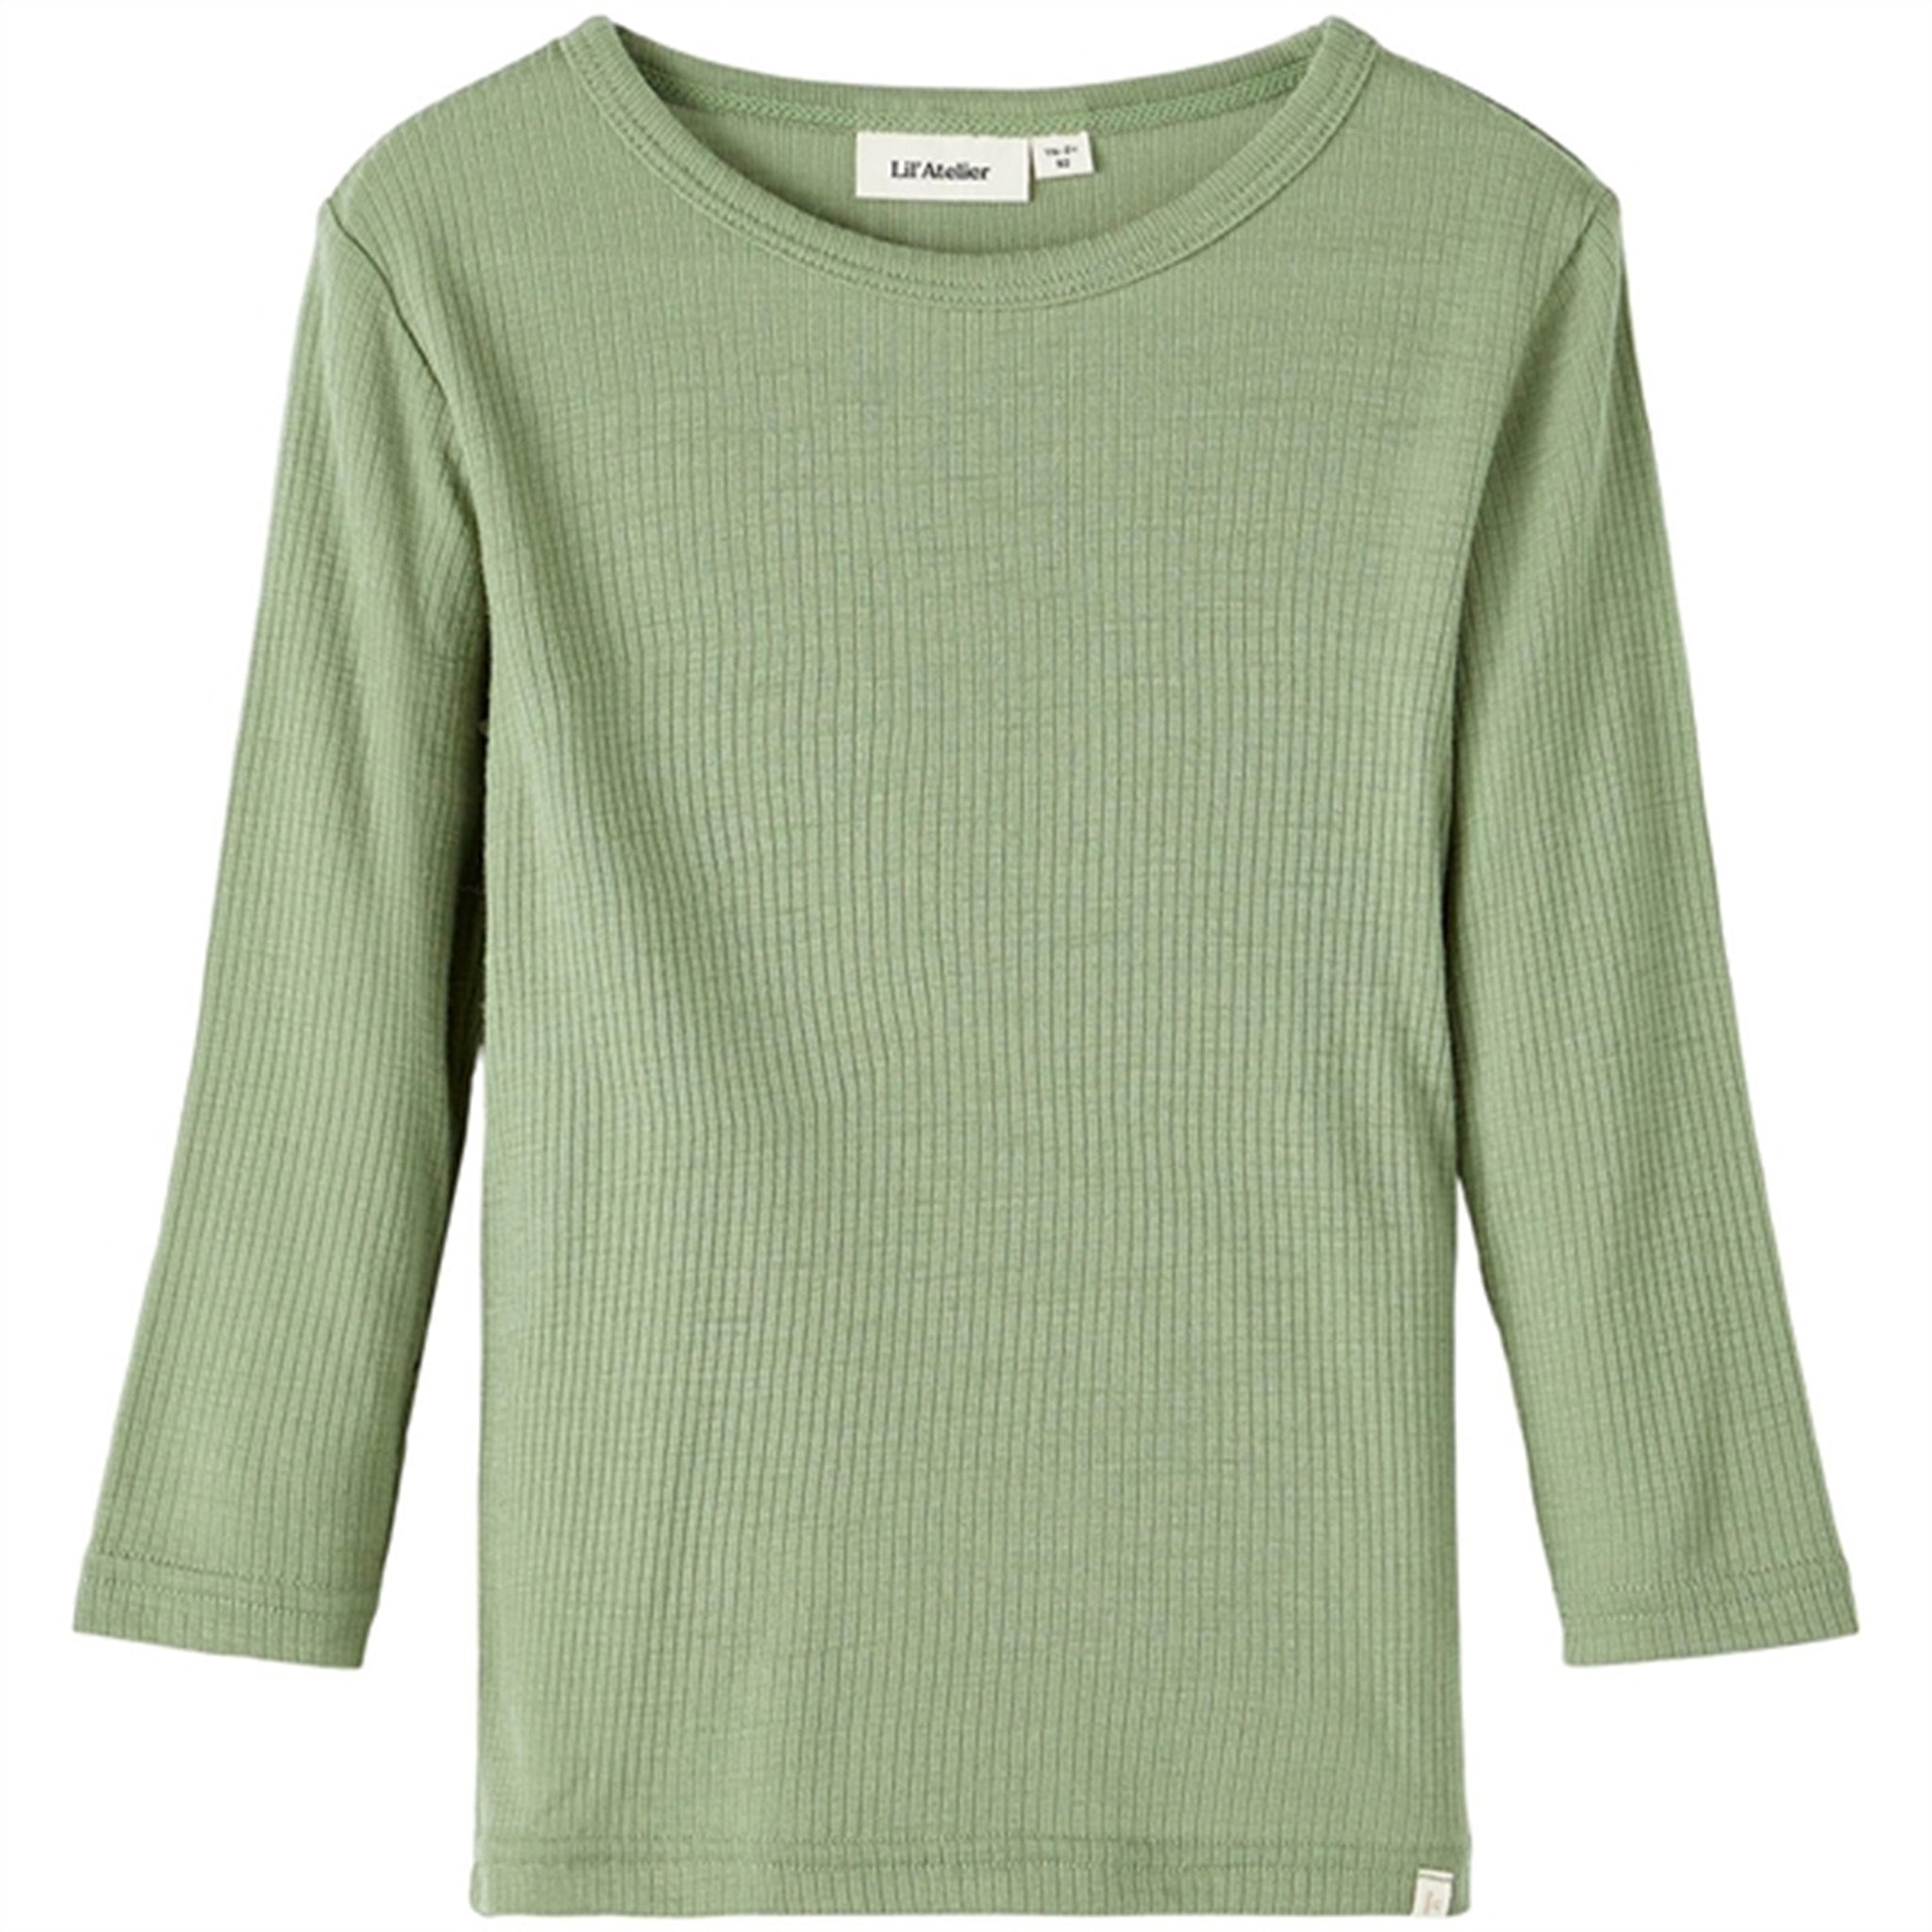 Lil'Atelier Oil Green Fable Slim Uld Bluse